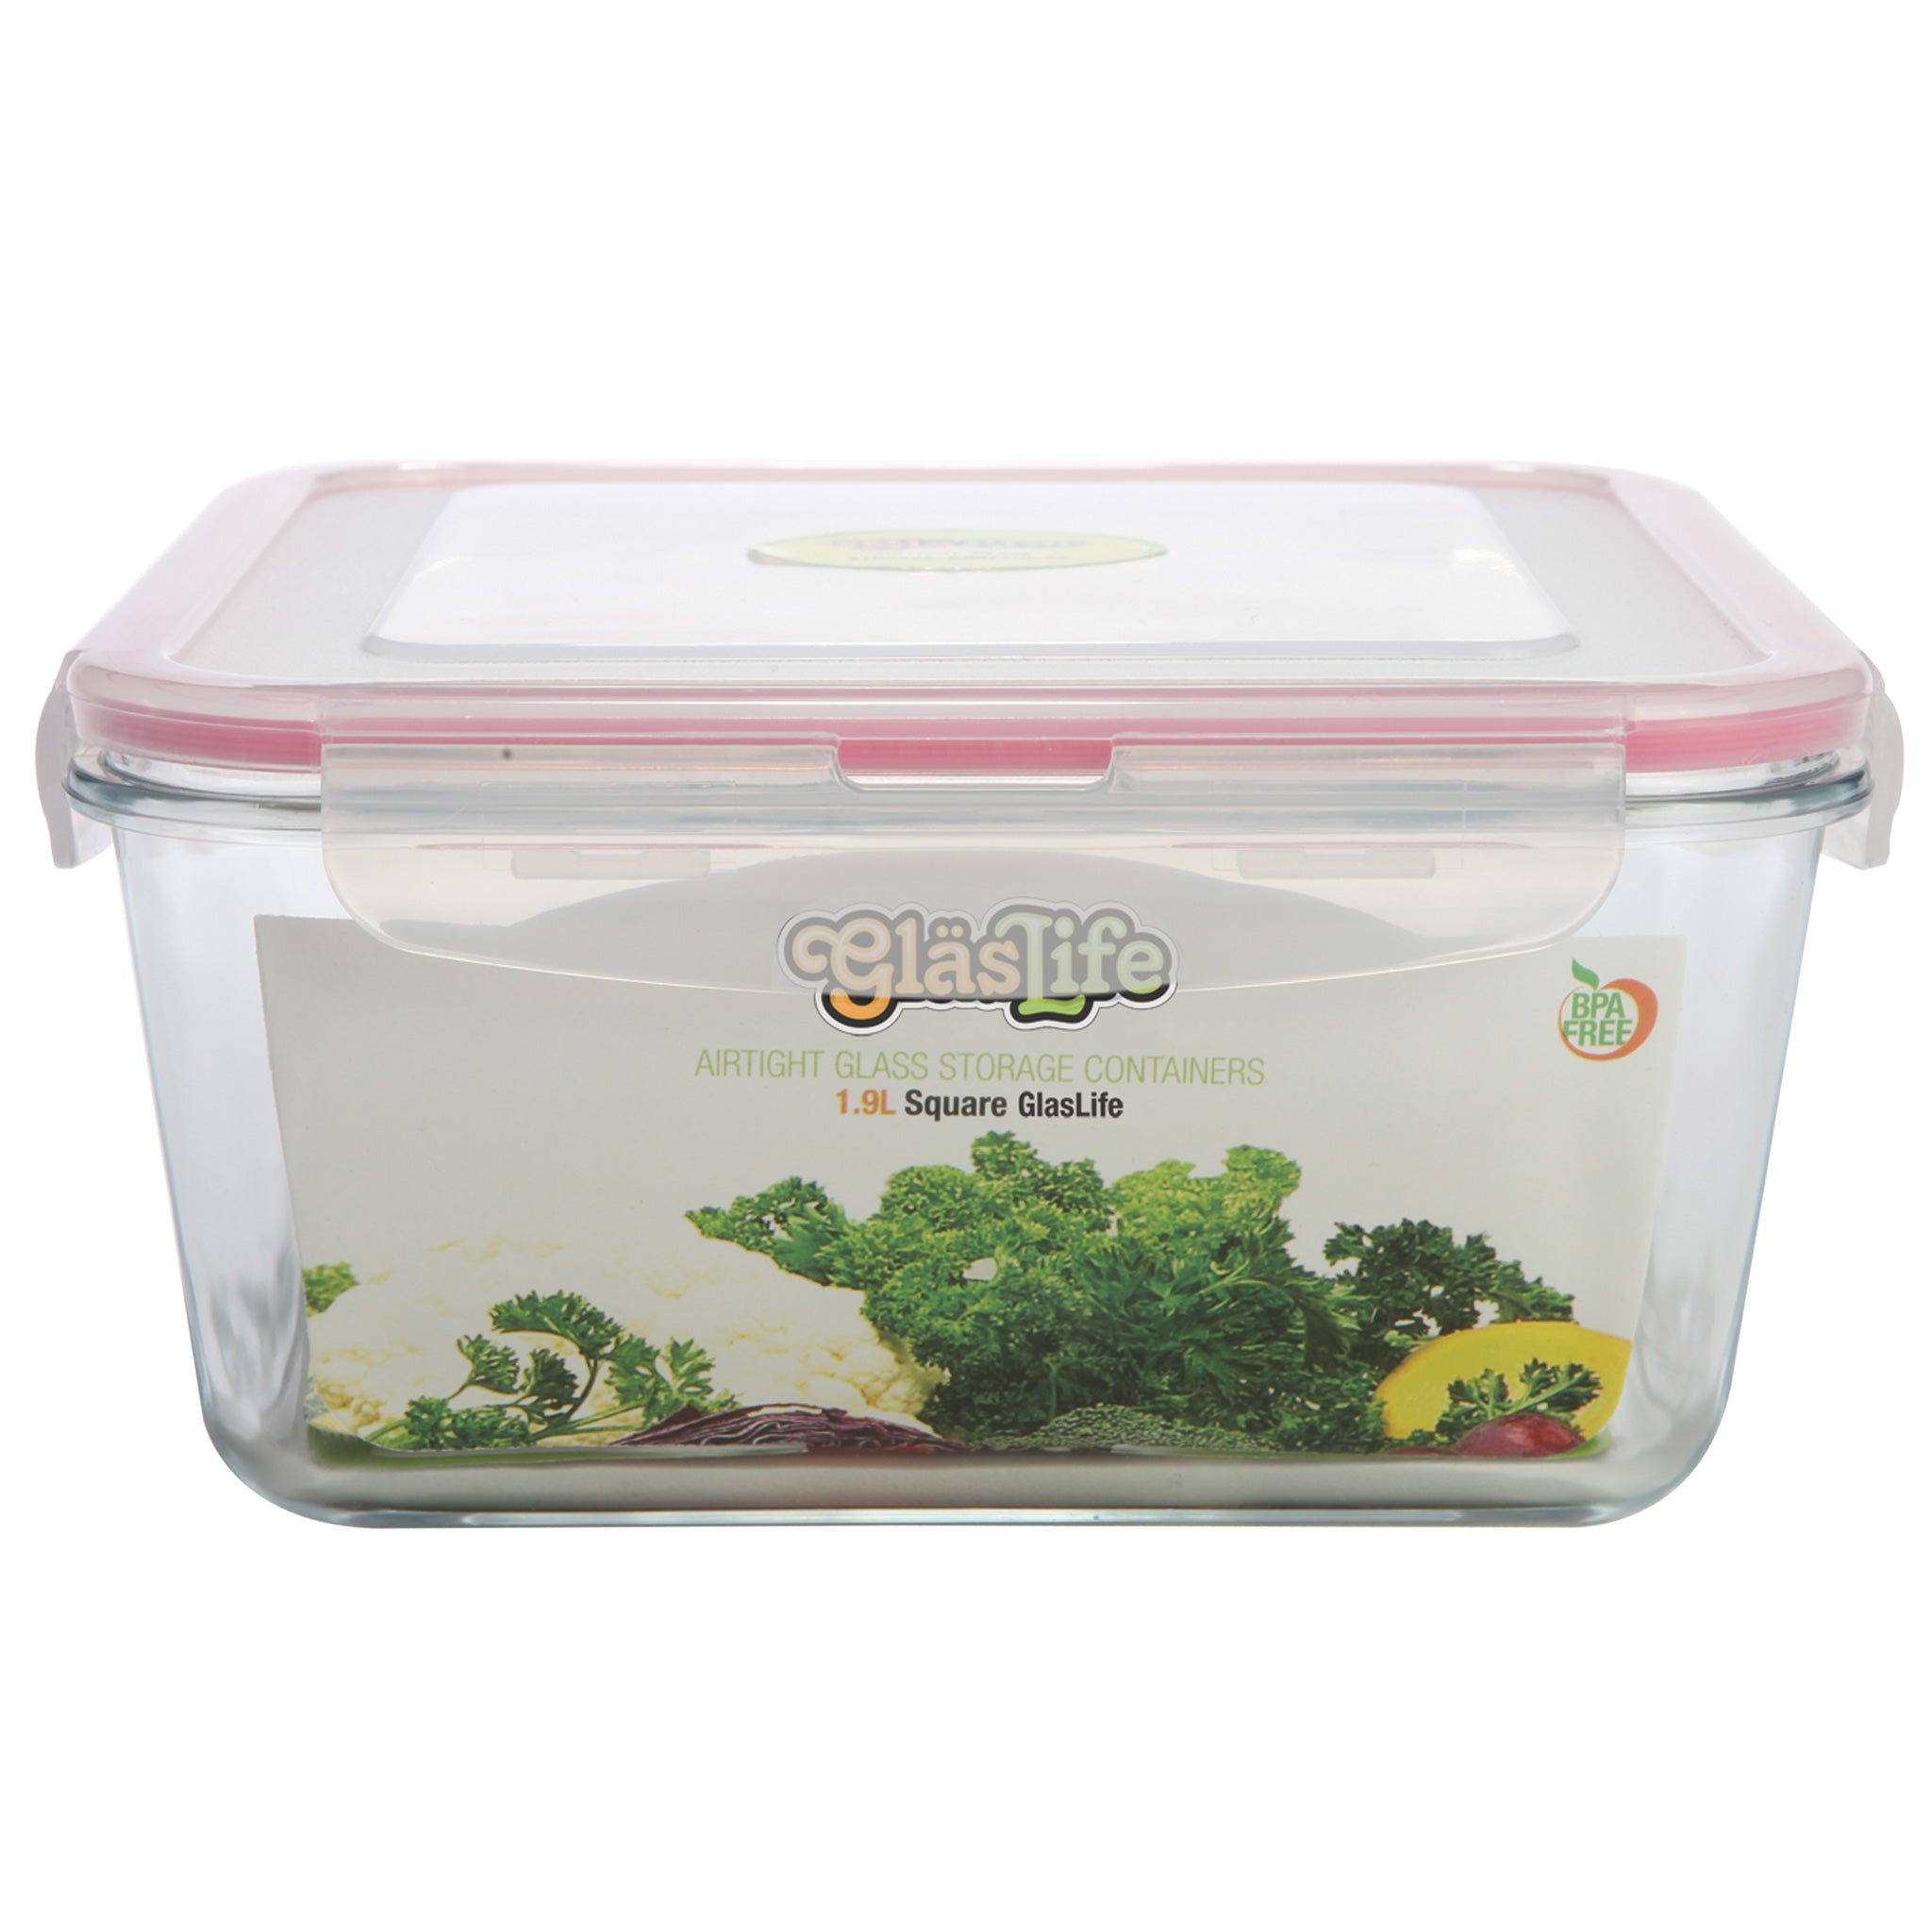 Airtight Food Storage Containers - 5 Piece Set - Air Tight Lid